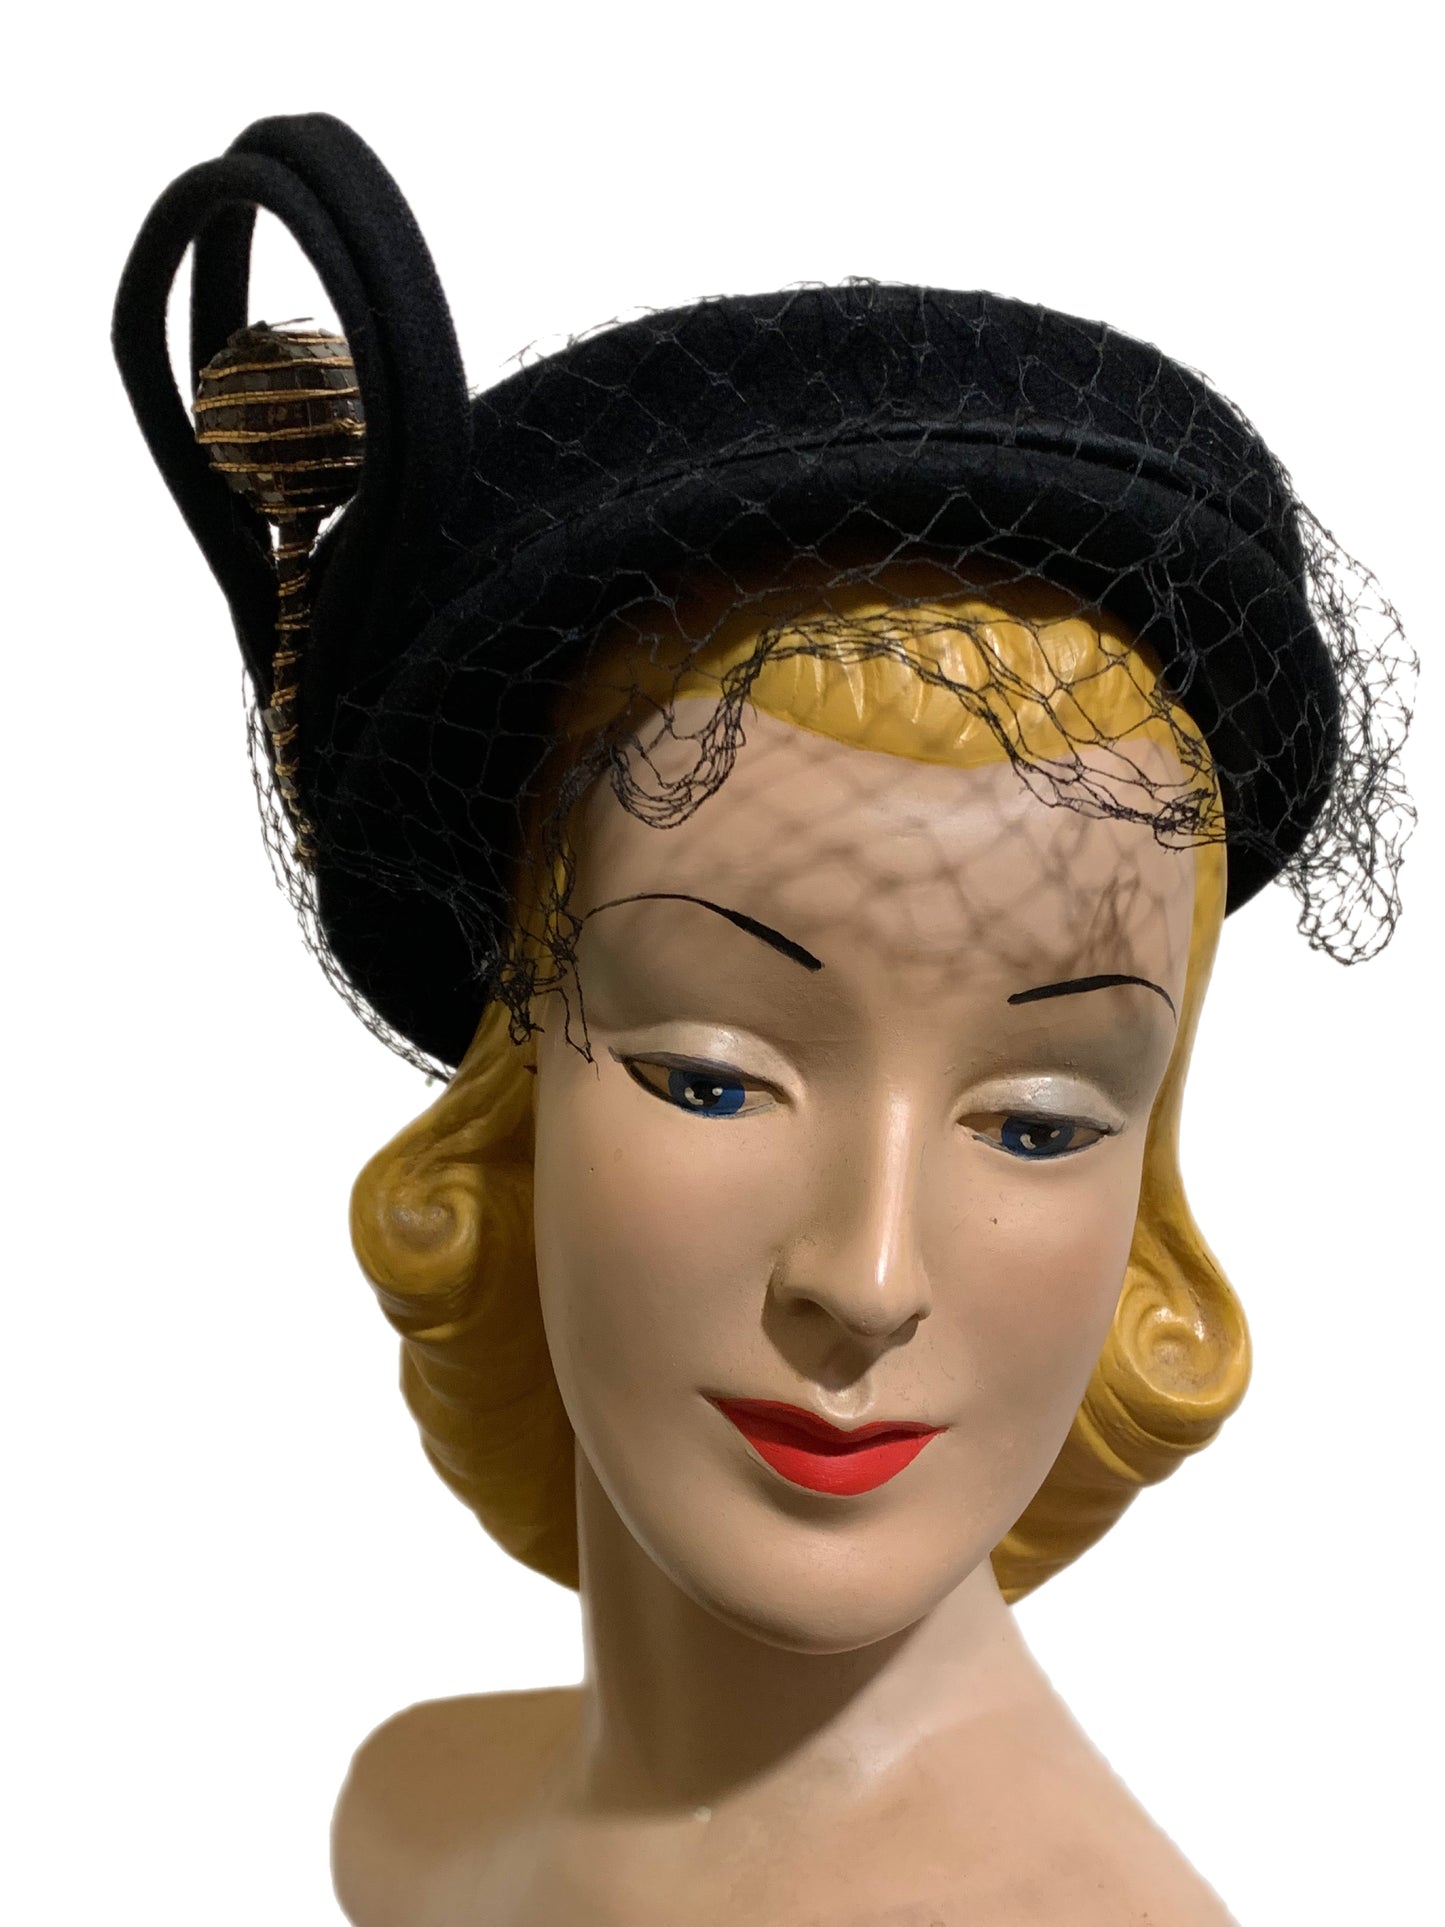 Glam Black Hat with Sculpted Swirl and Metallic Trimmed Accent circa 1930s